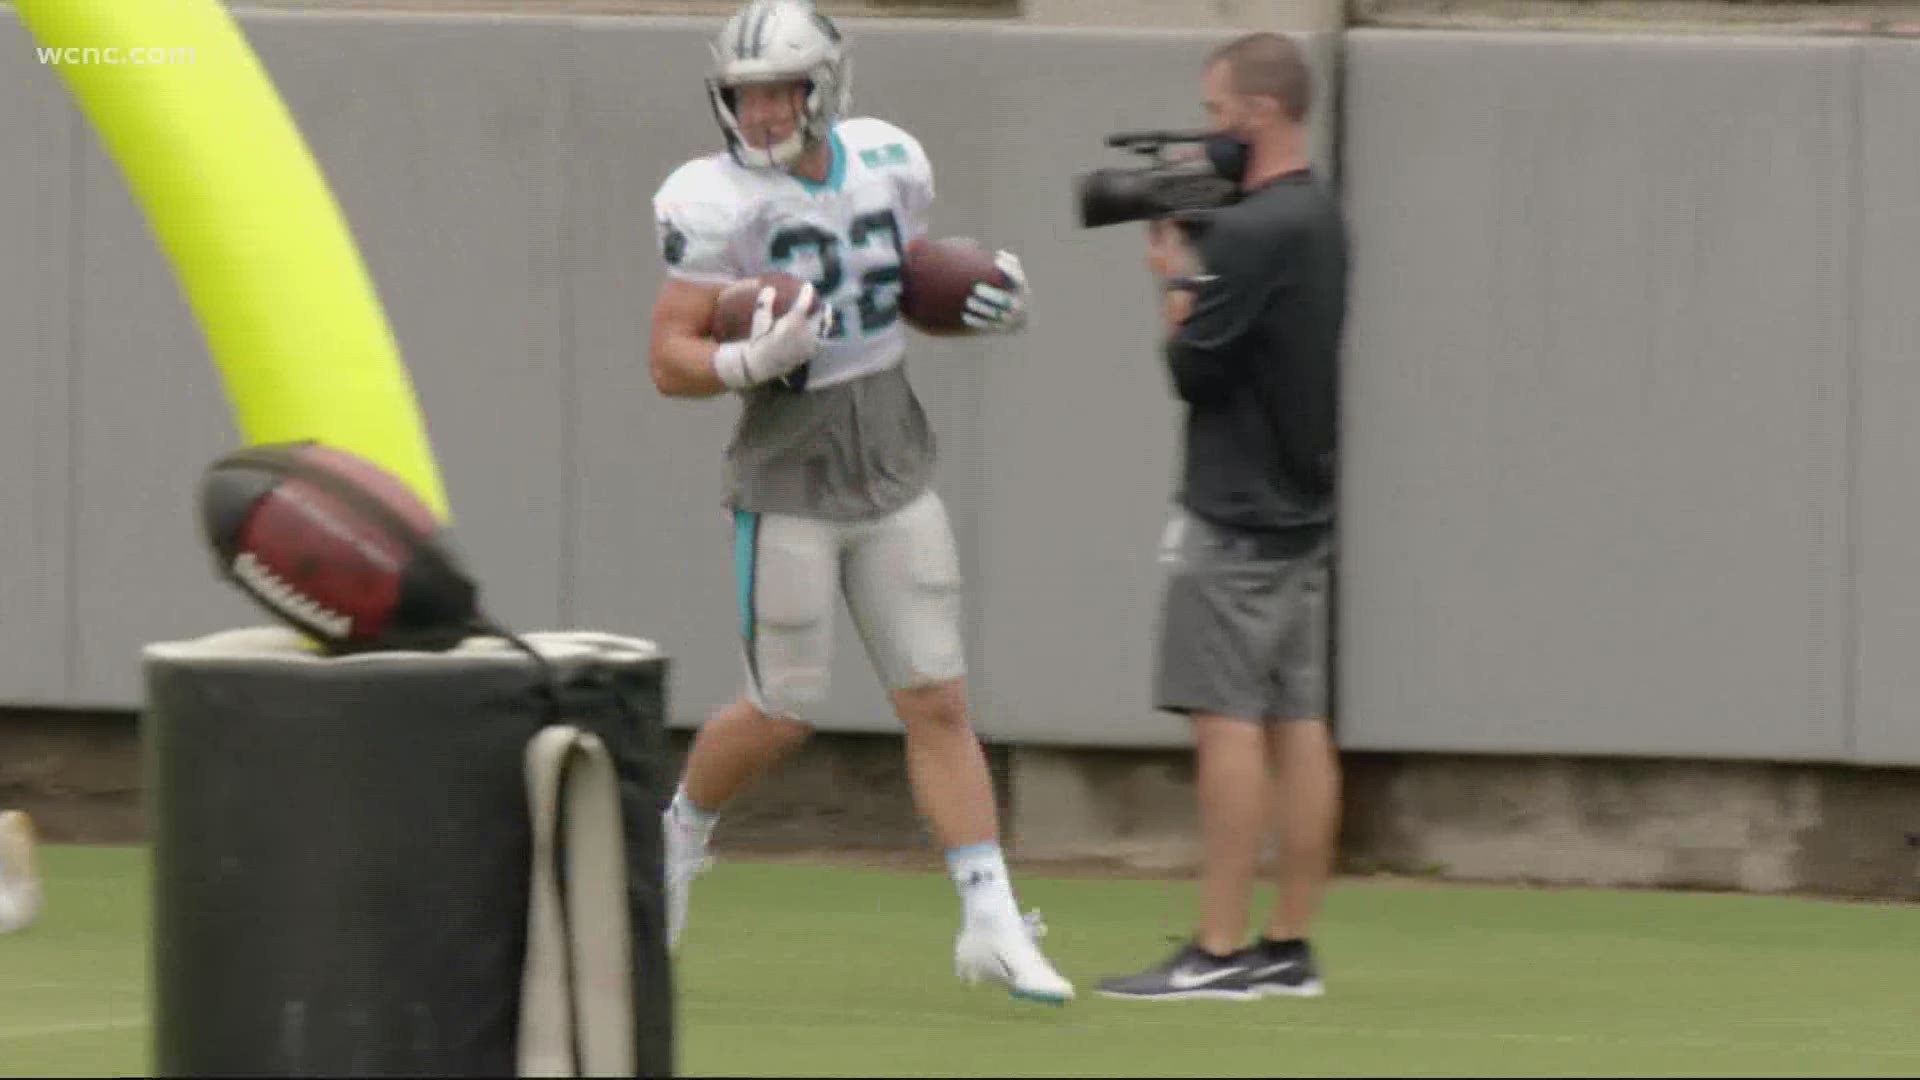 After placing a second player on the NFL's COVID-19 list in just a few days Tuesday, the Carolina Panthers delayed practice about 2 1/2 hours to conduct more testing